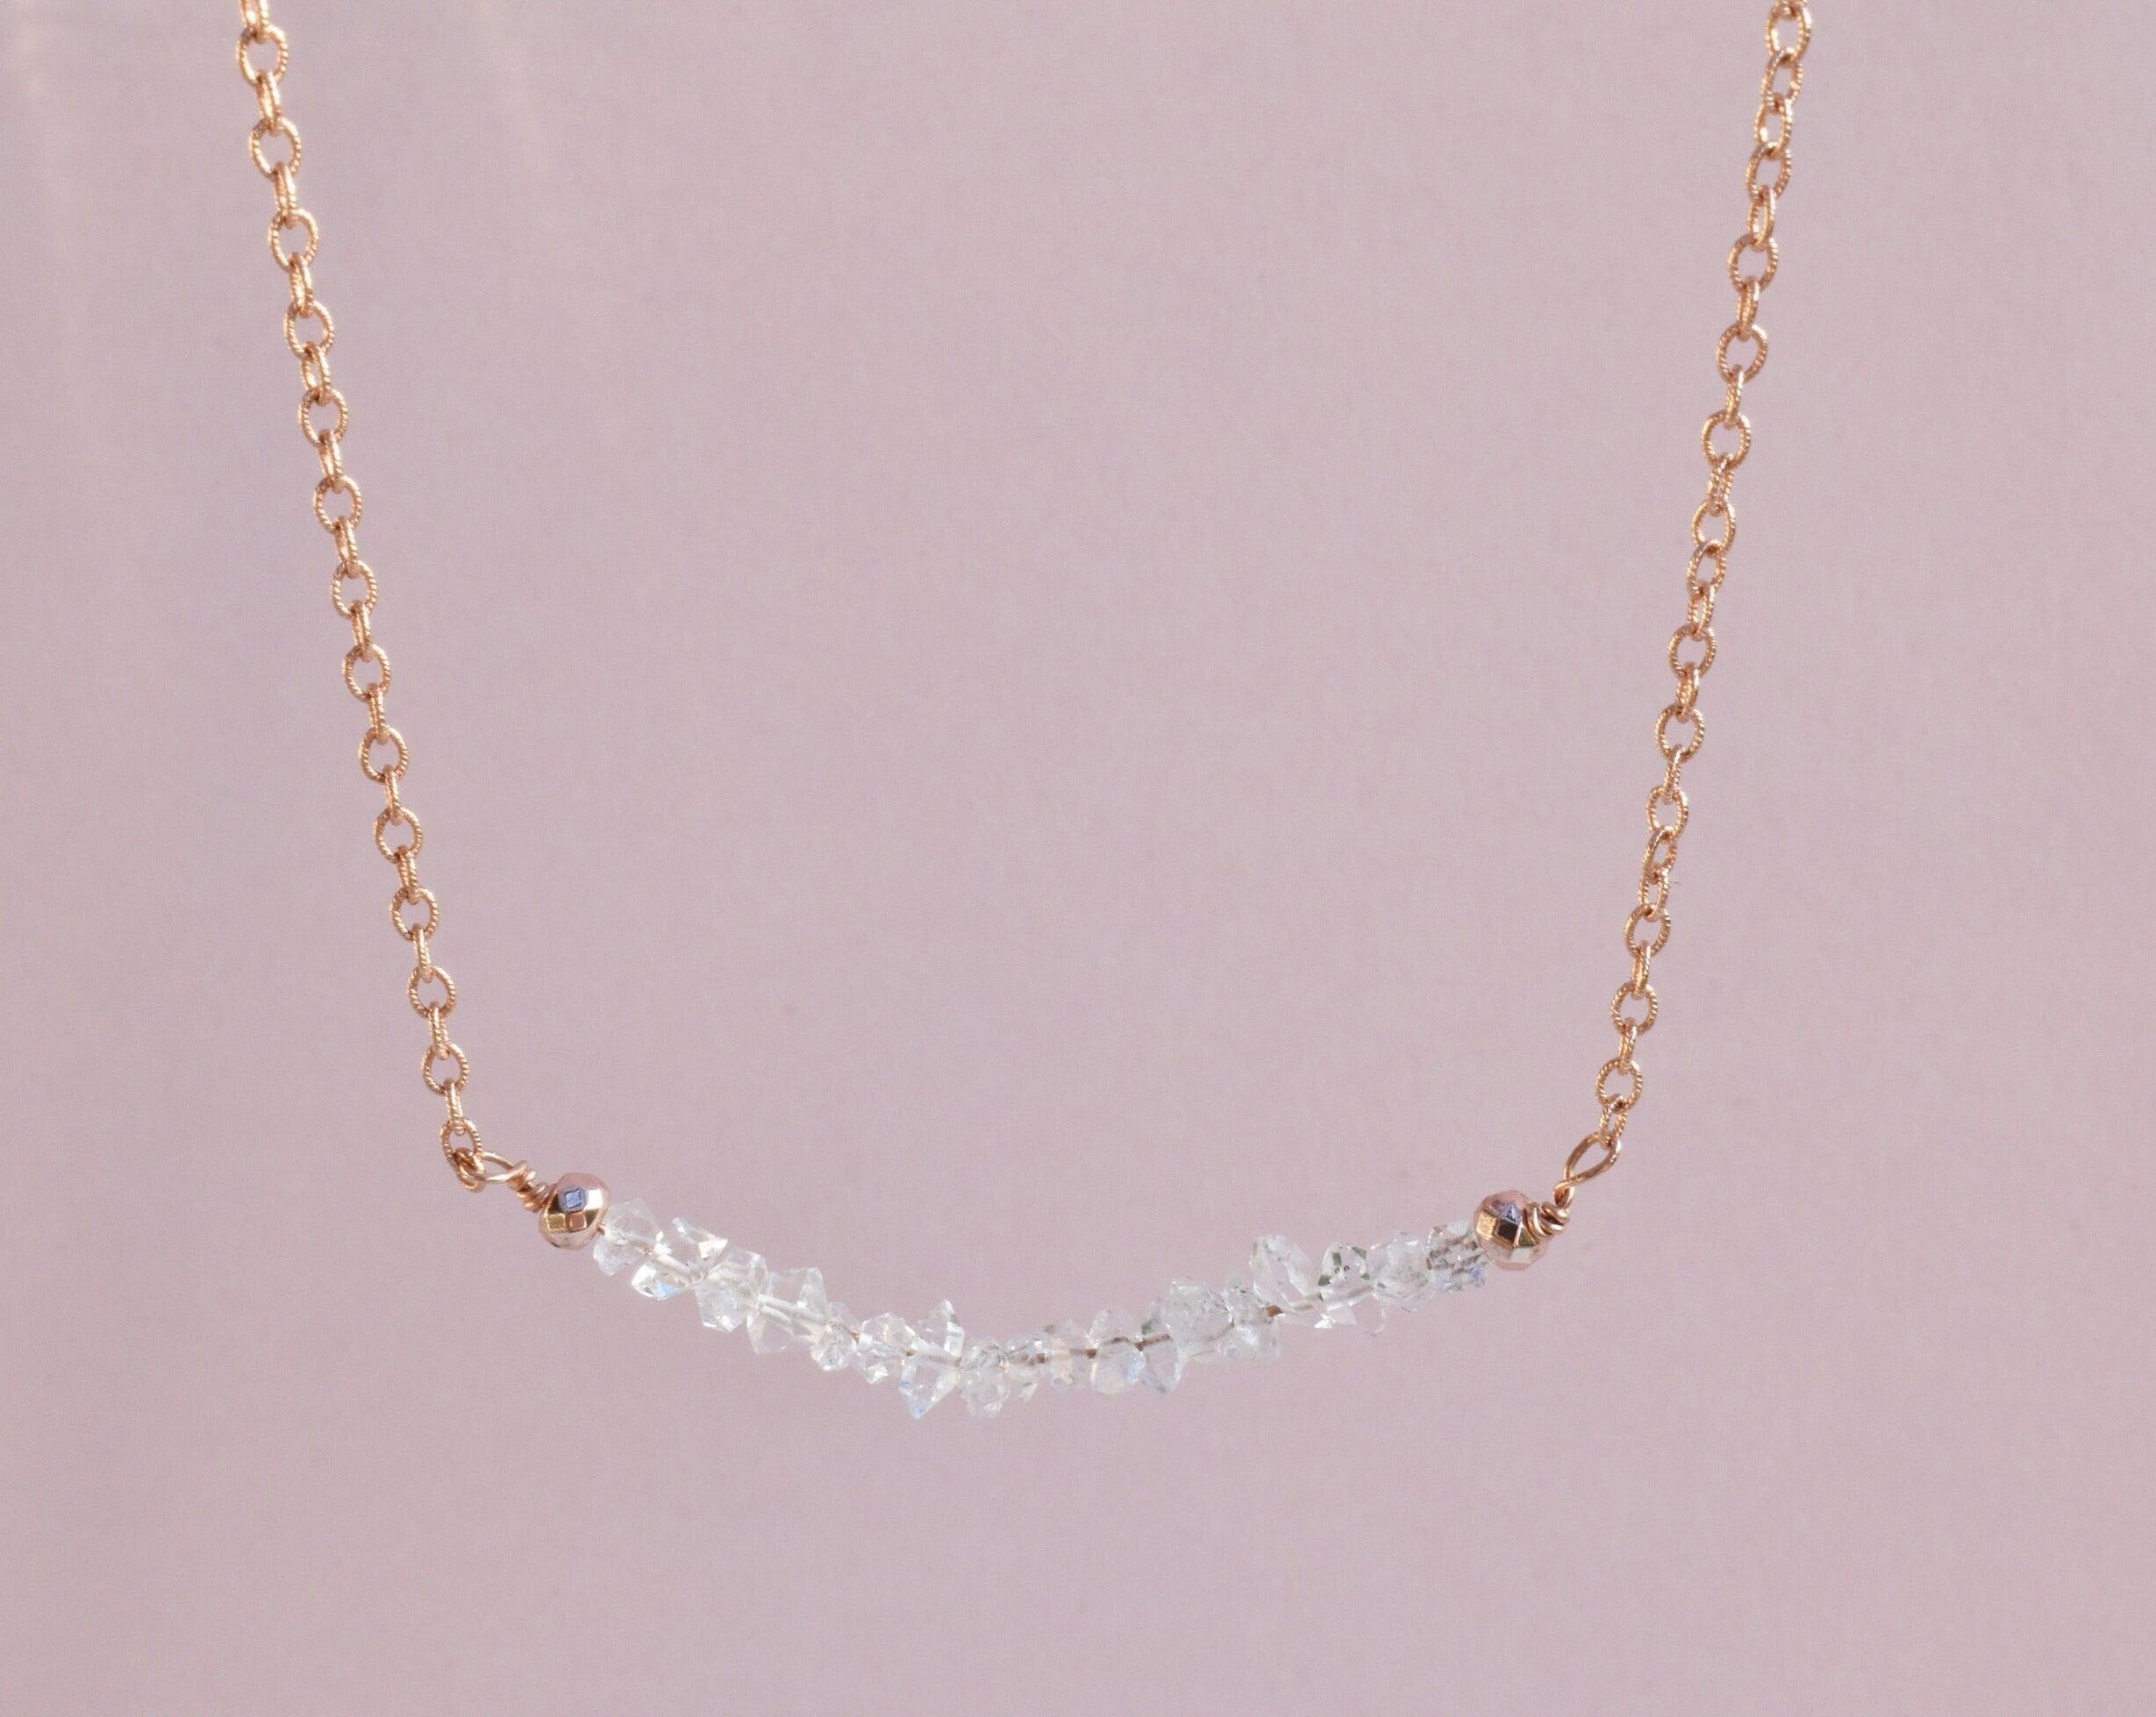 Rose gold Herkimer Diamond healing gemstone necklace. Herkimer diamonds are the strongest of all quartz. Their divination surpasses all healing gemstones as they are known to amplify spiritual energy and carry the universal life force.